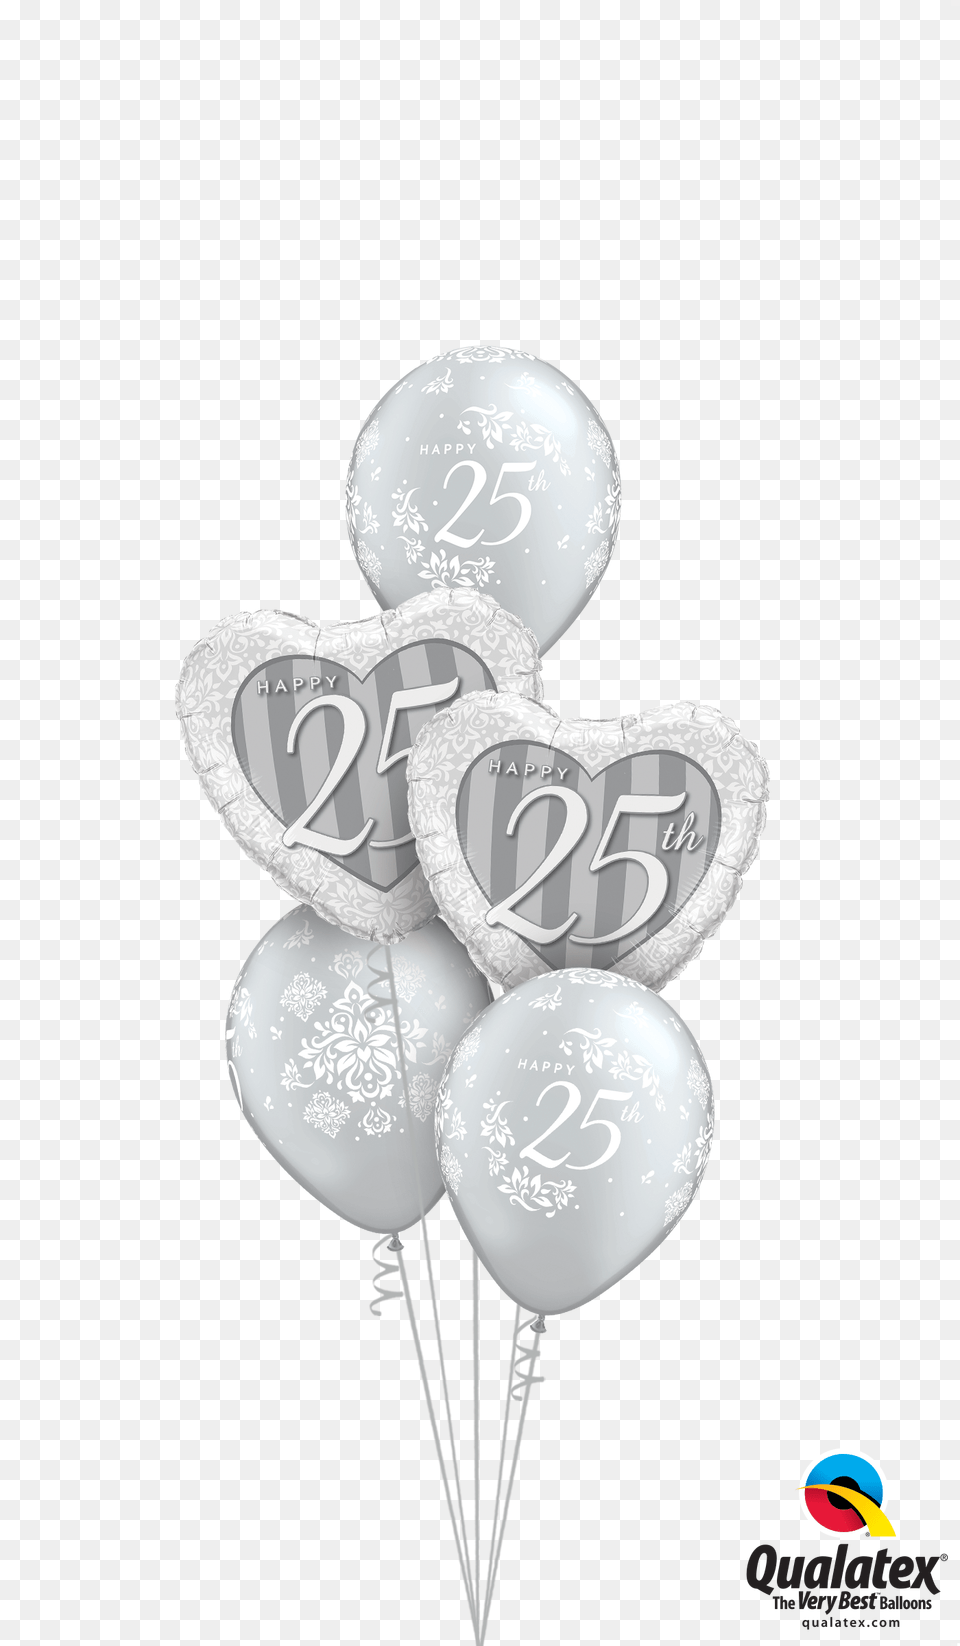 25th Anniversary Classic At London Helium Balloons 25th Wedding Anniversary Helium Balloons, Balloon, Accessories, Jewelry Png